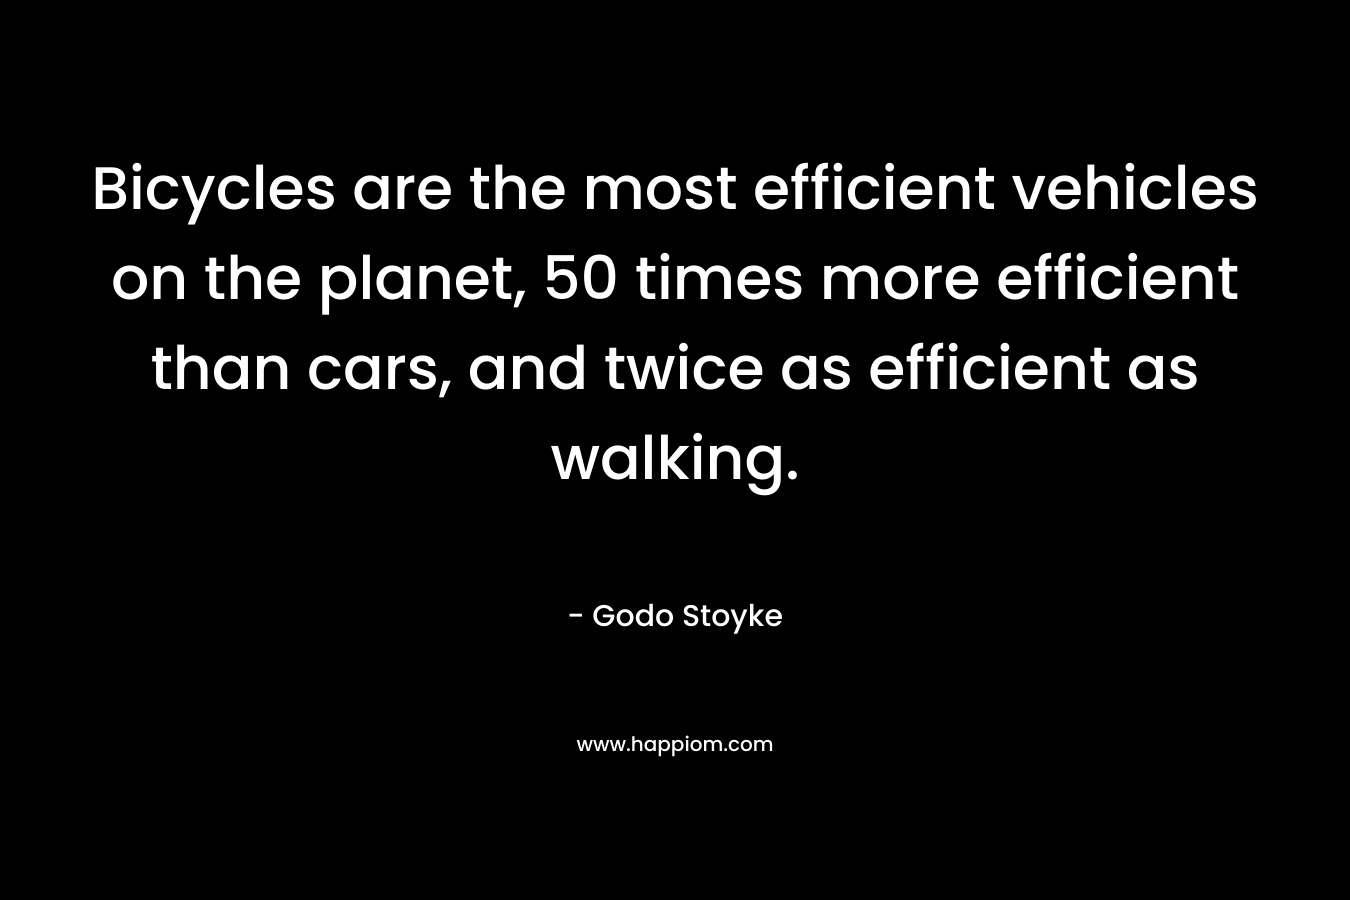 Bicycles are the most efficient vehicles on the planet, 50 times more efficient than cars, and twice as efficient as walking. – Godo Stoyke